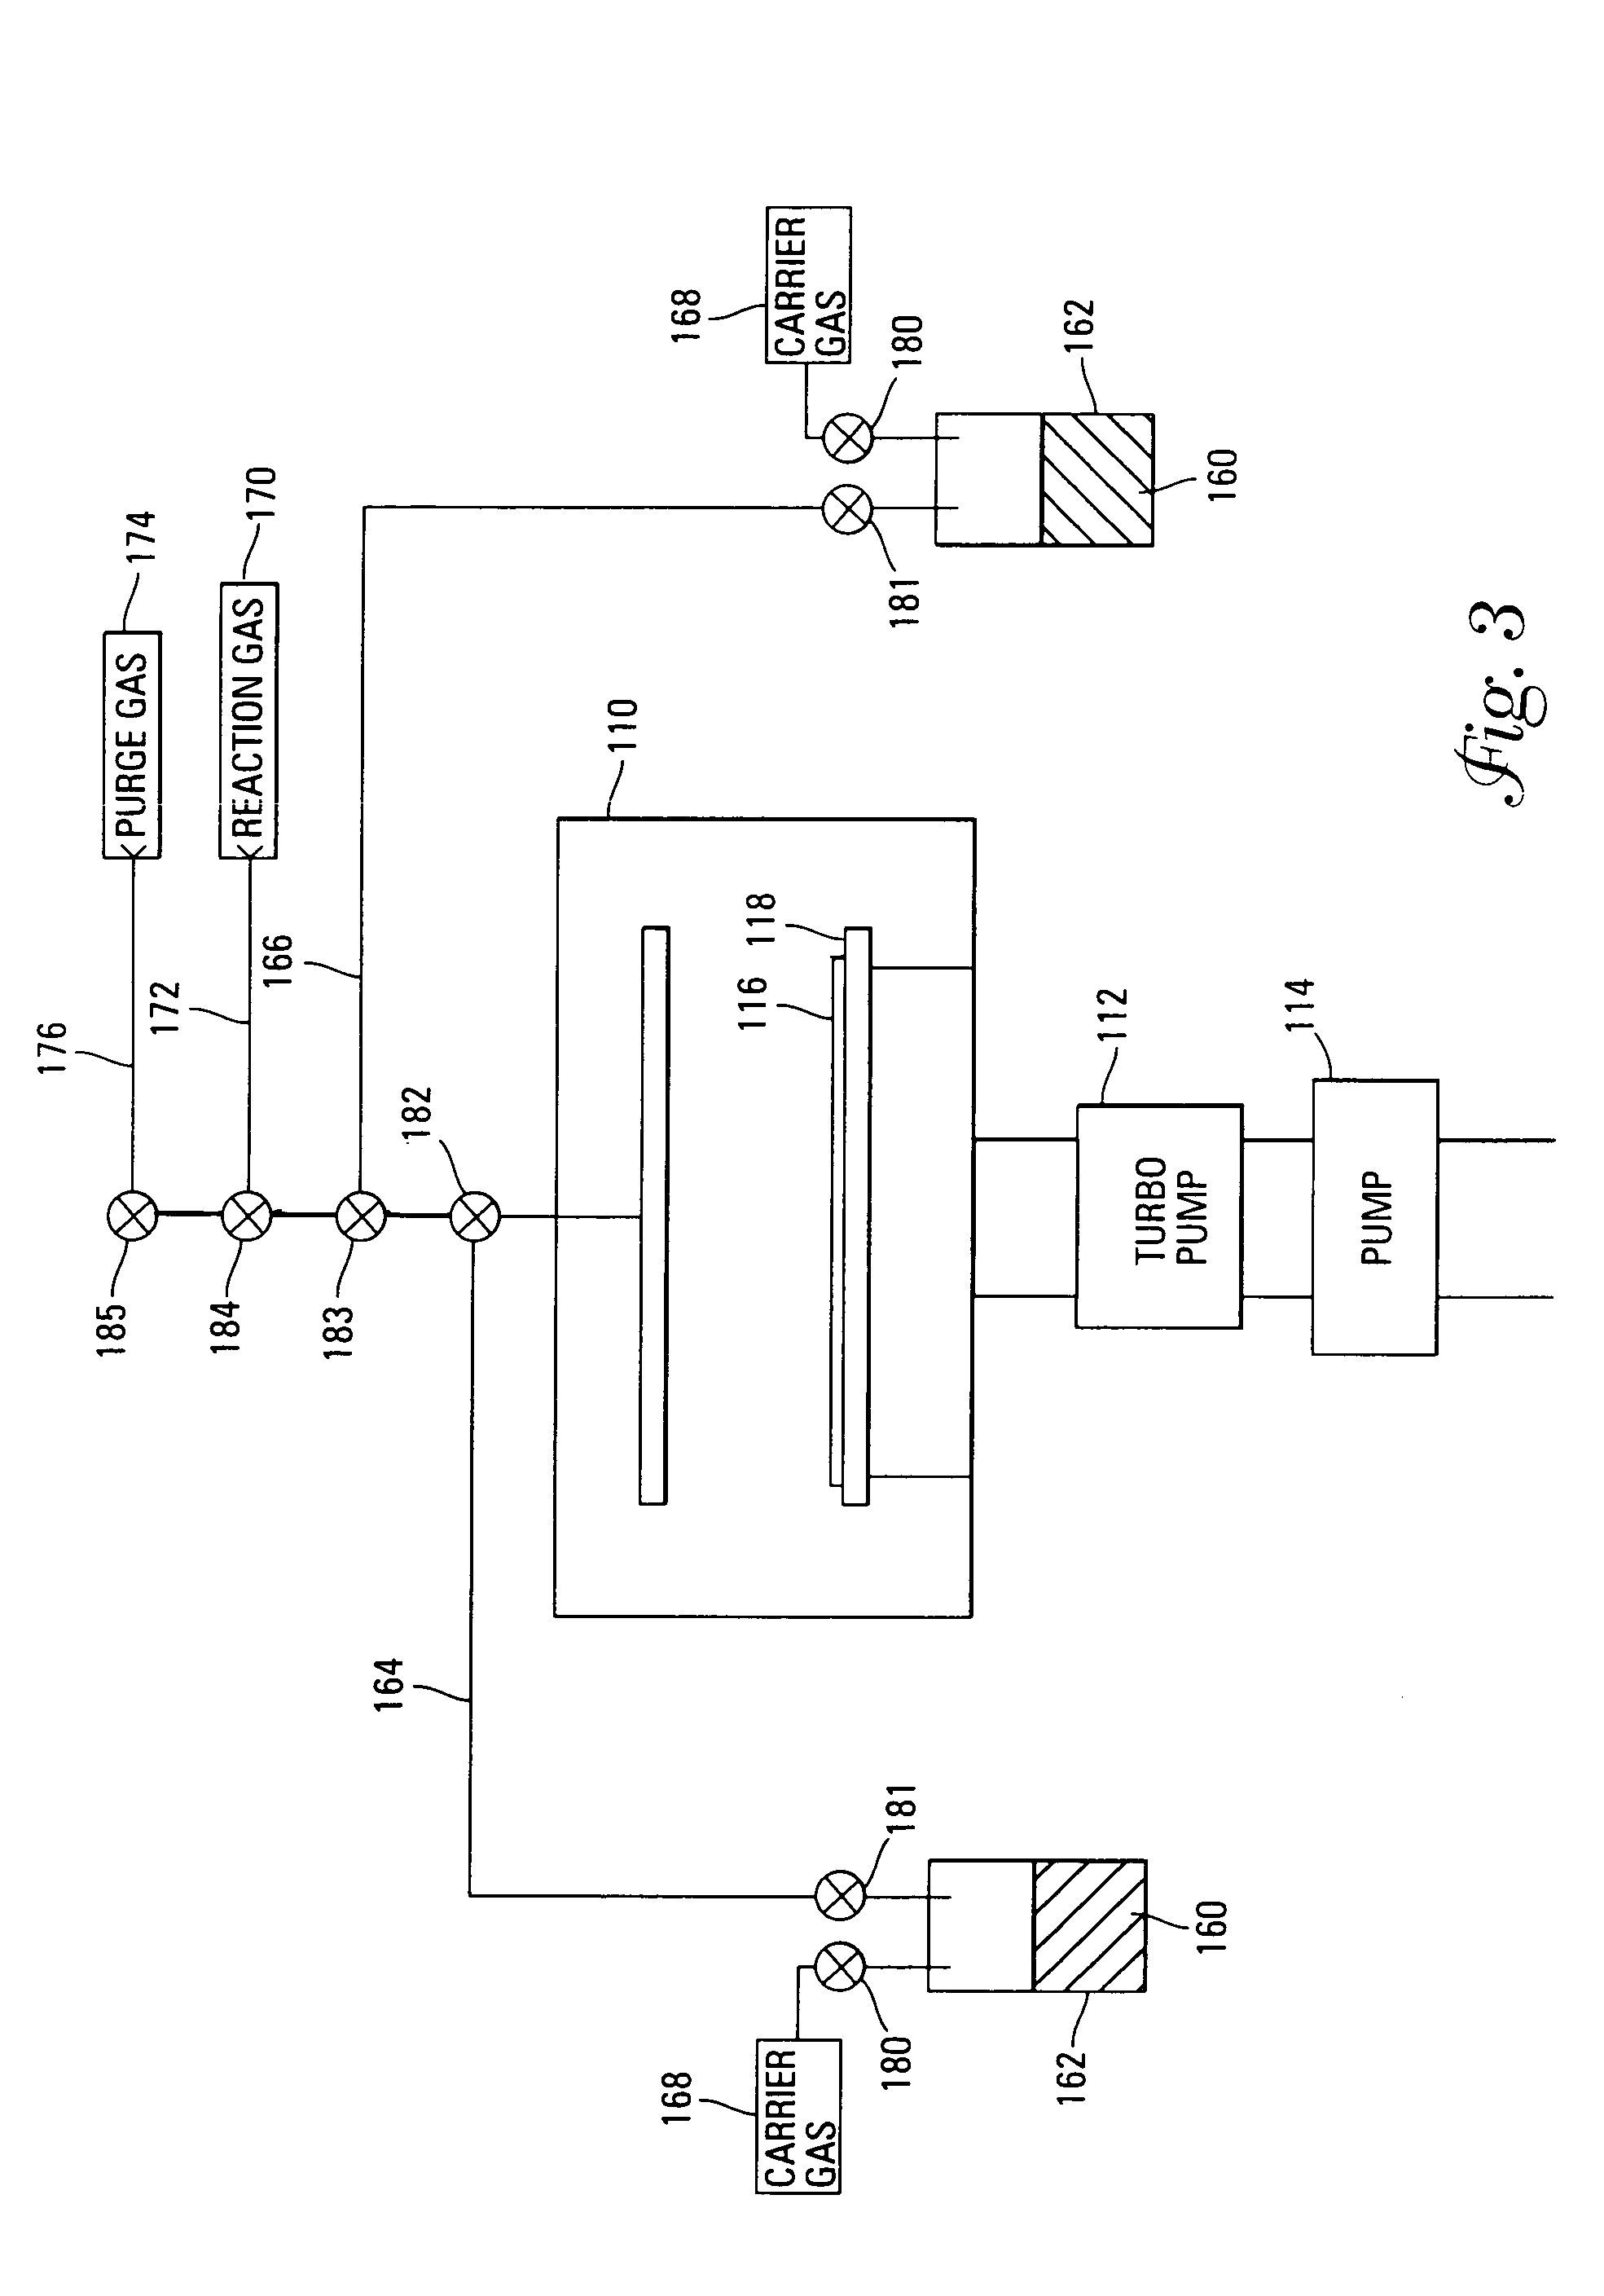 Systems and methods for forming refractory metal nitride layers using organic amines